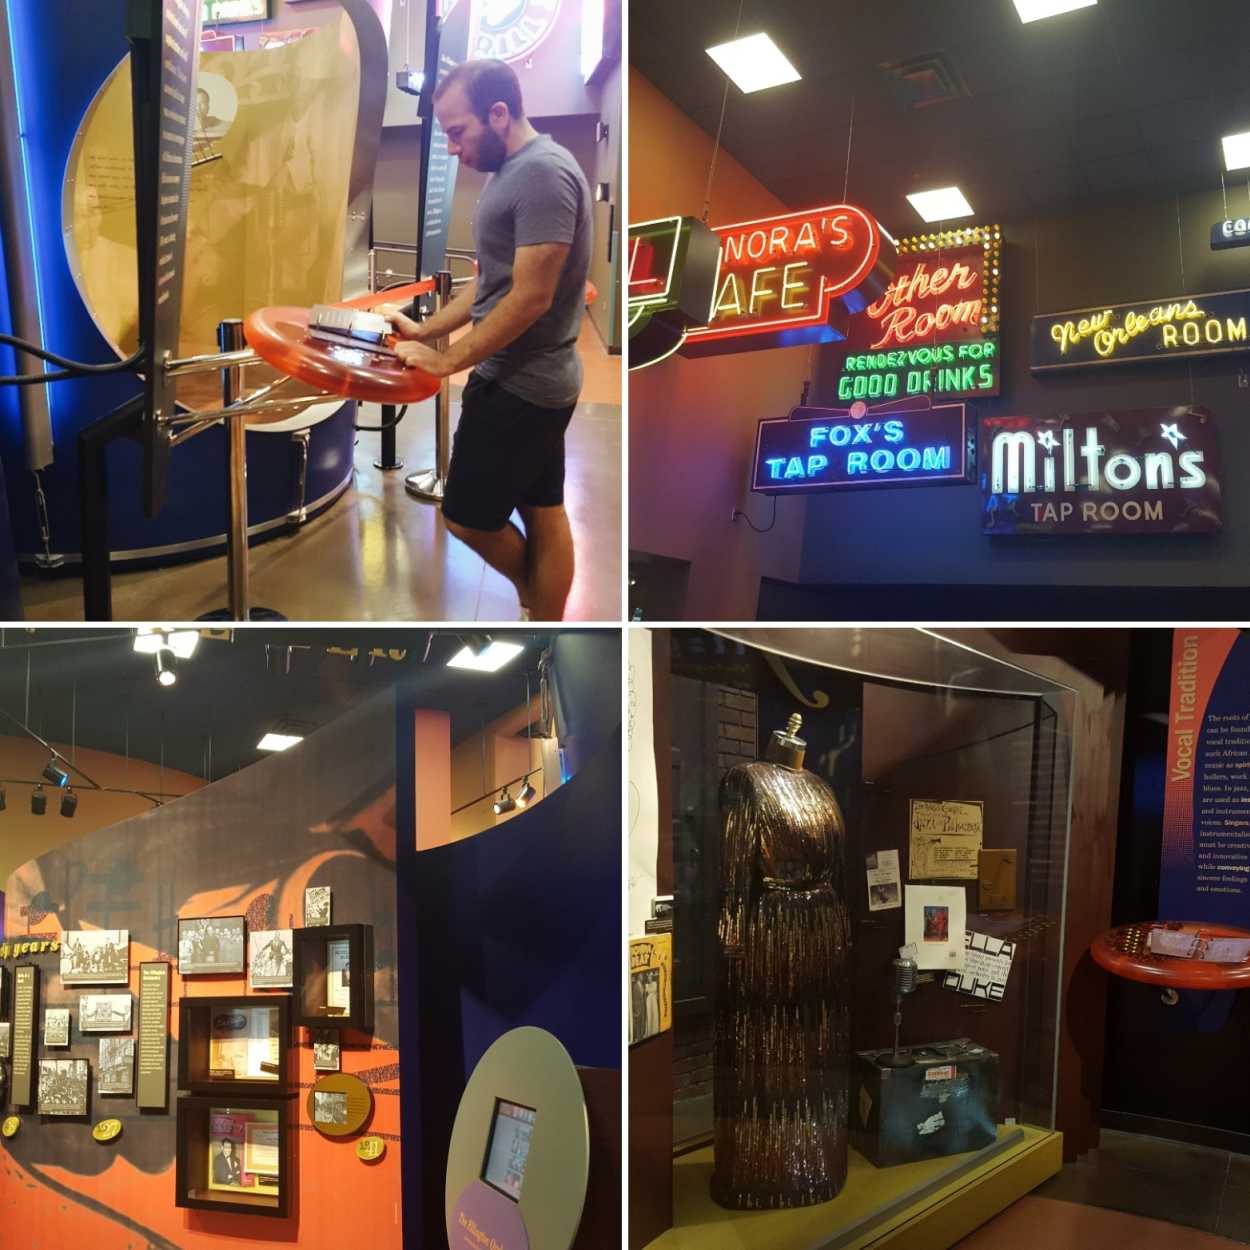 Collage of photos taken during a visit to the American Jazz Museum